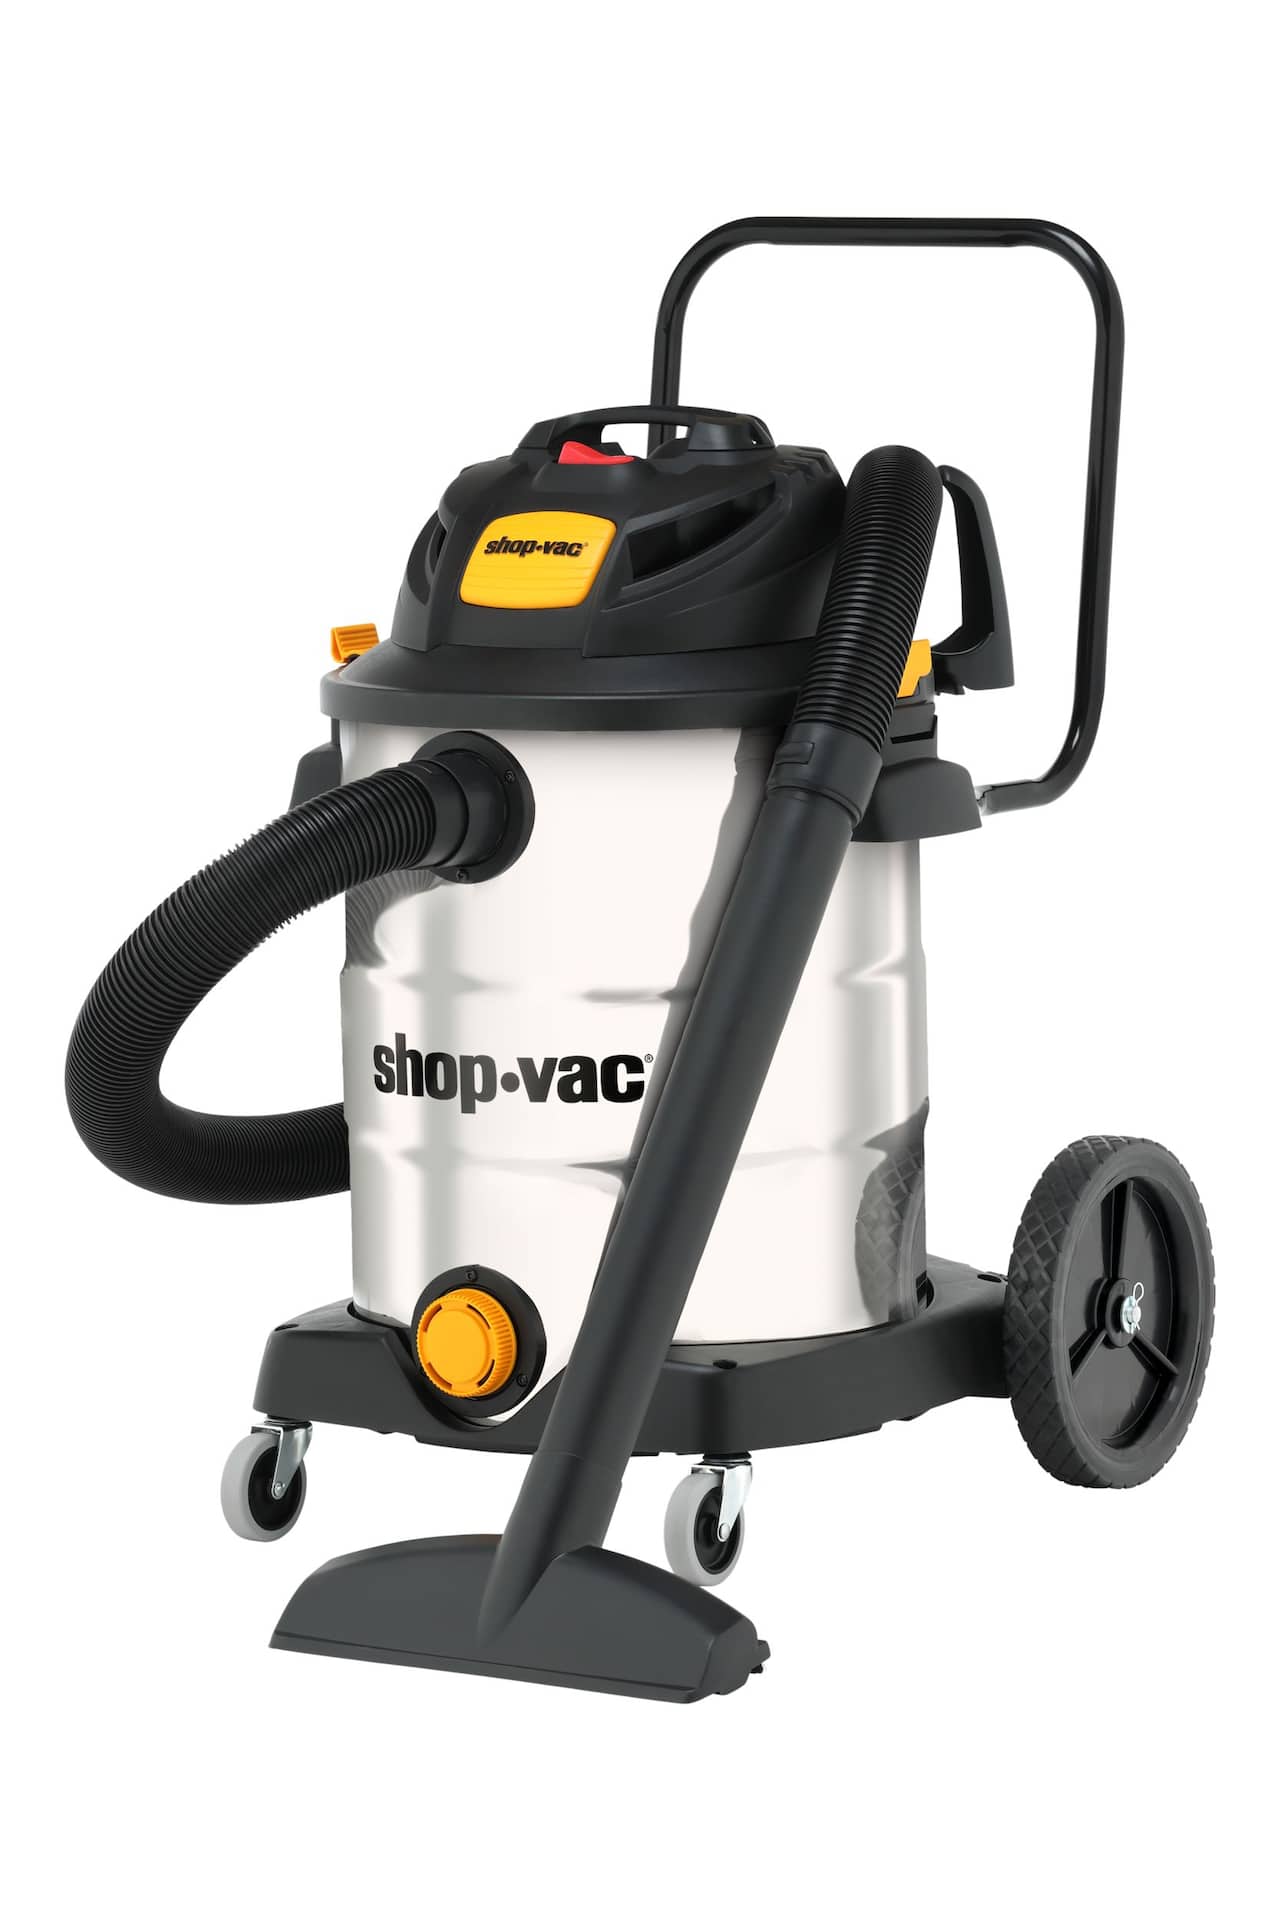 https://media-www.canadiantire.ca/product/fixing/tools/wet-dry-vacuums/0540365/shop-vac-16g-stainless-steel-wet-dry-vacuum-ef4bafe2-2303-41b0-943a-eccaa858f464-jpgrendition.jpg